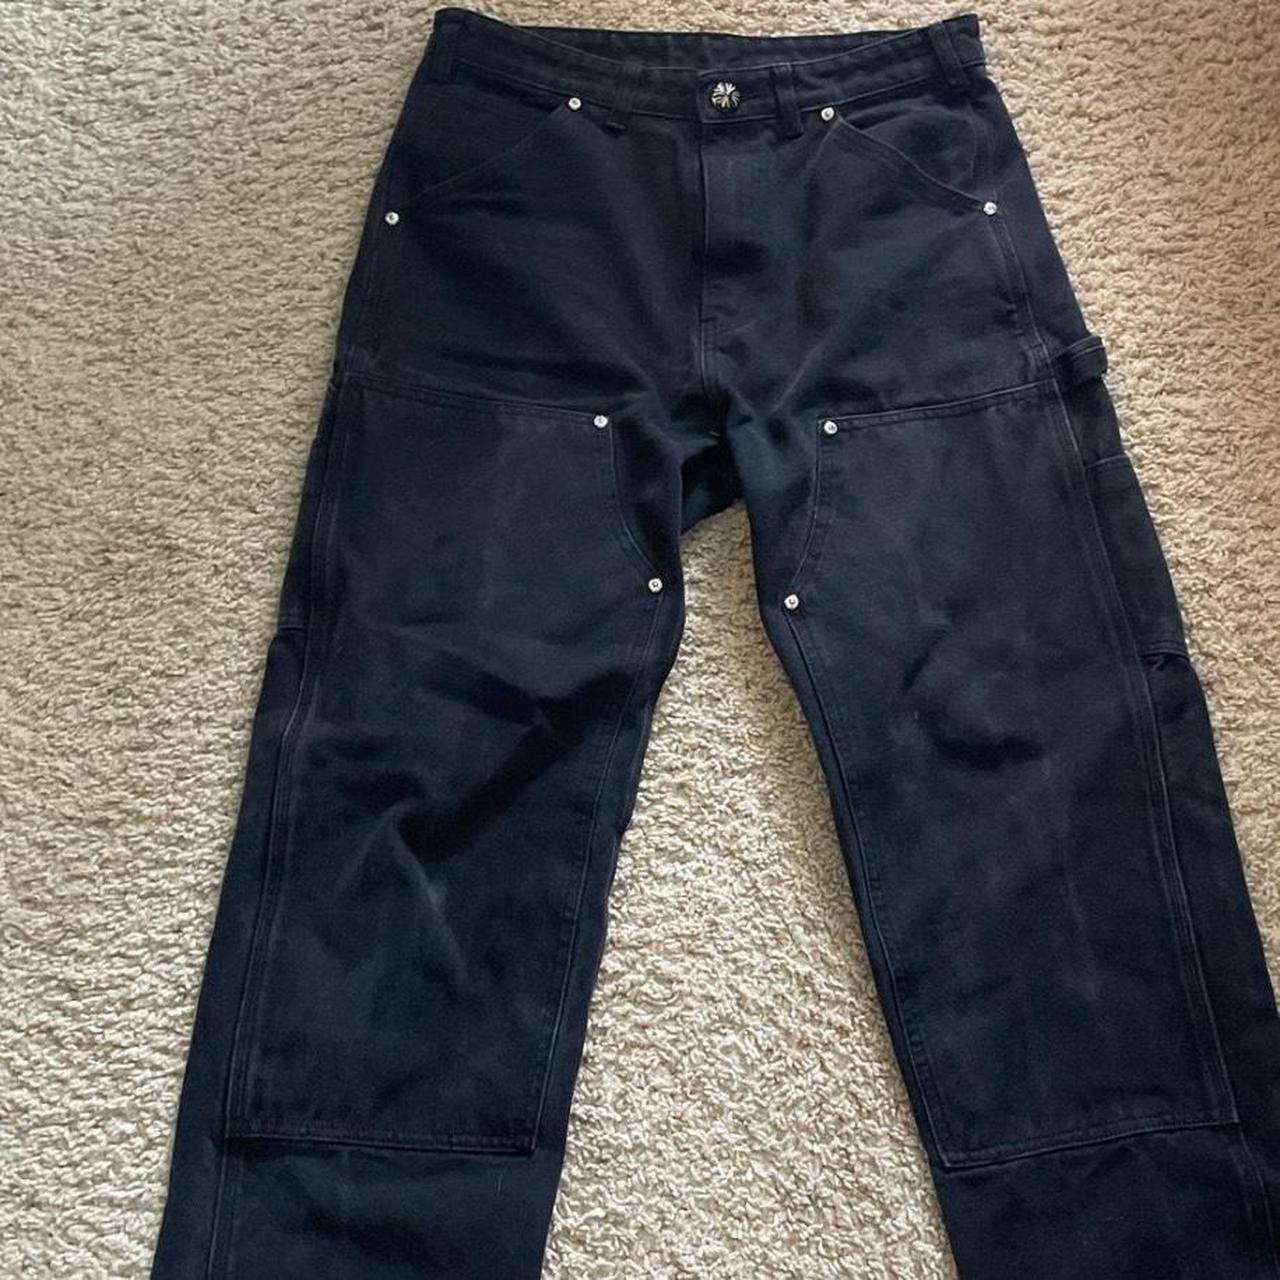 Baggy chrome hearts in perfect condition size 32 - Depop